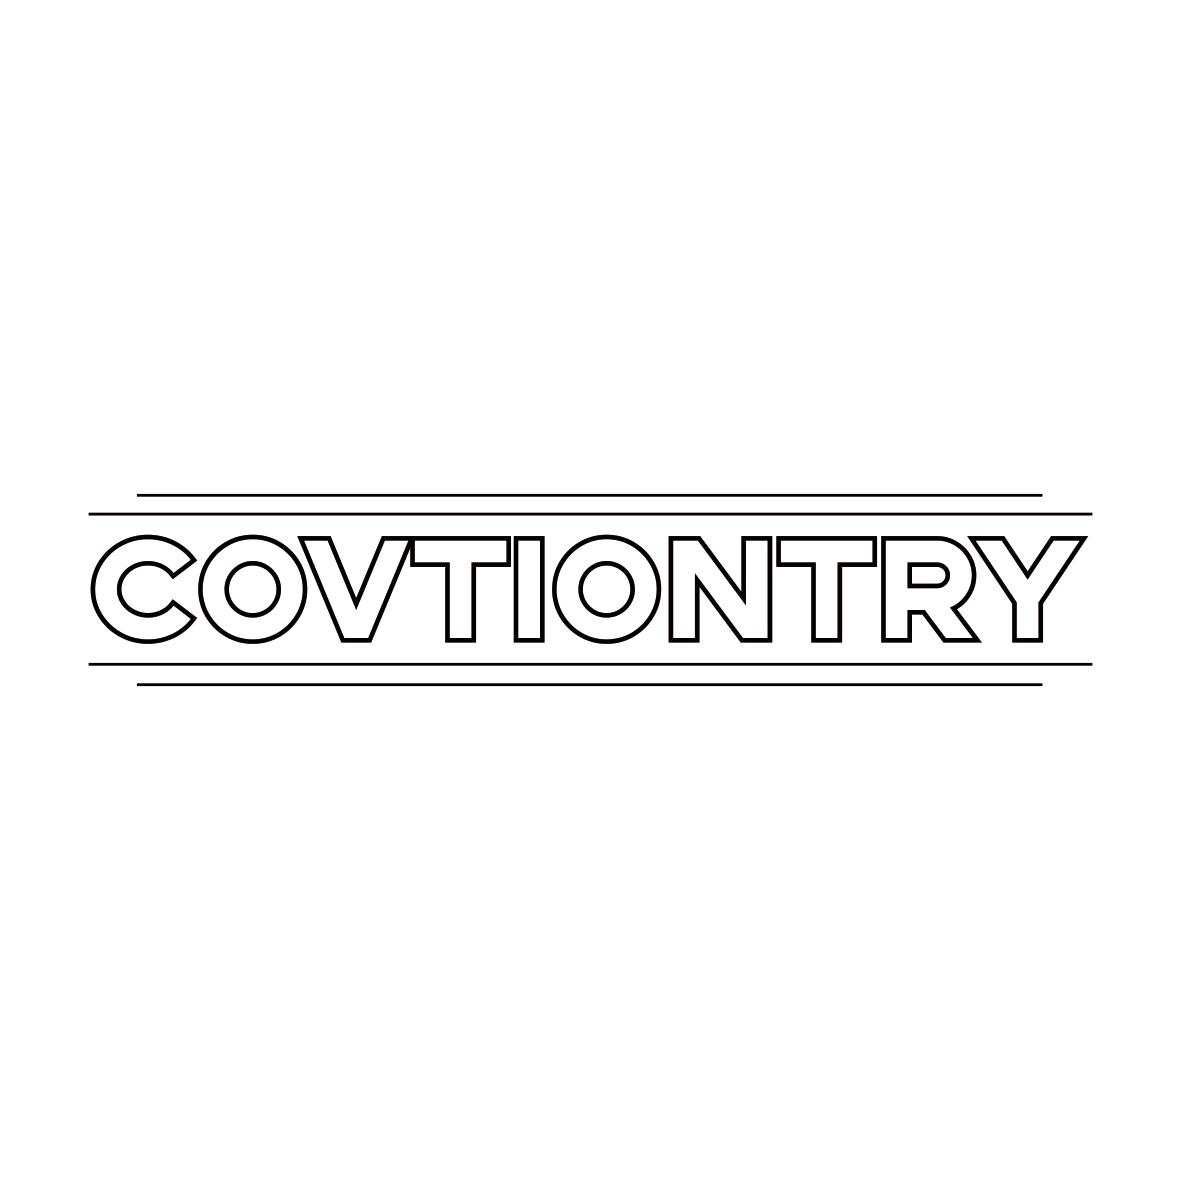 COVTIONTRY